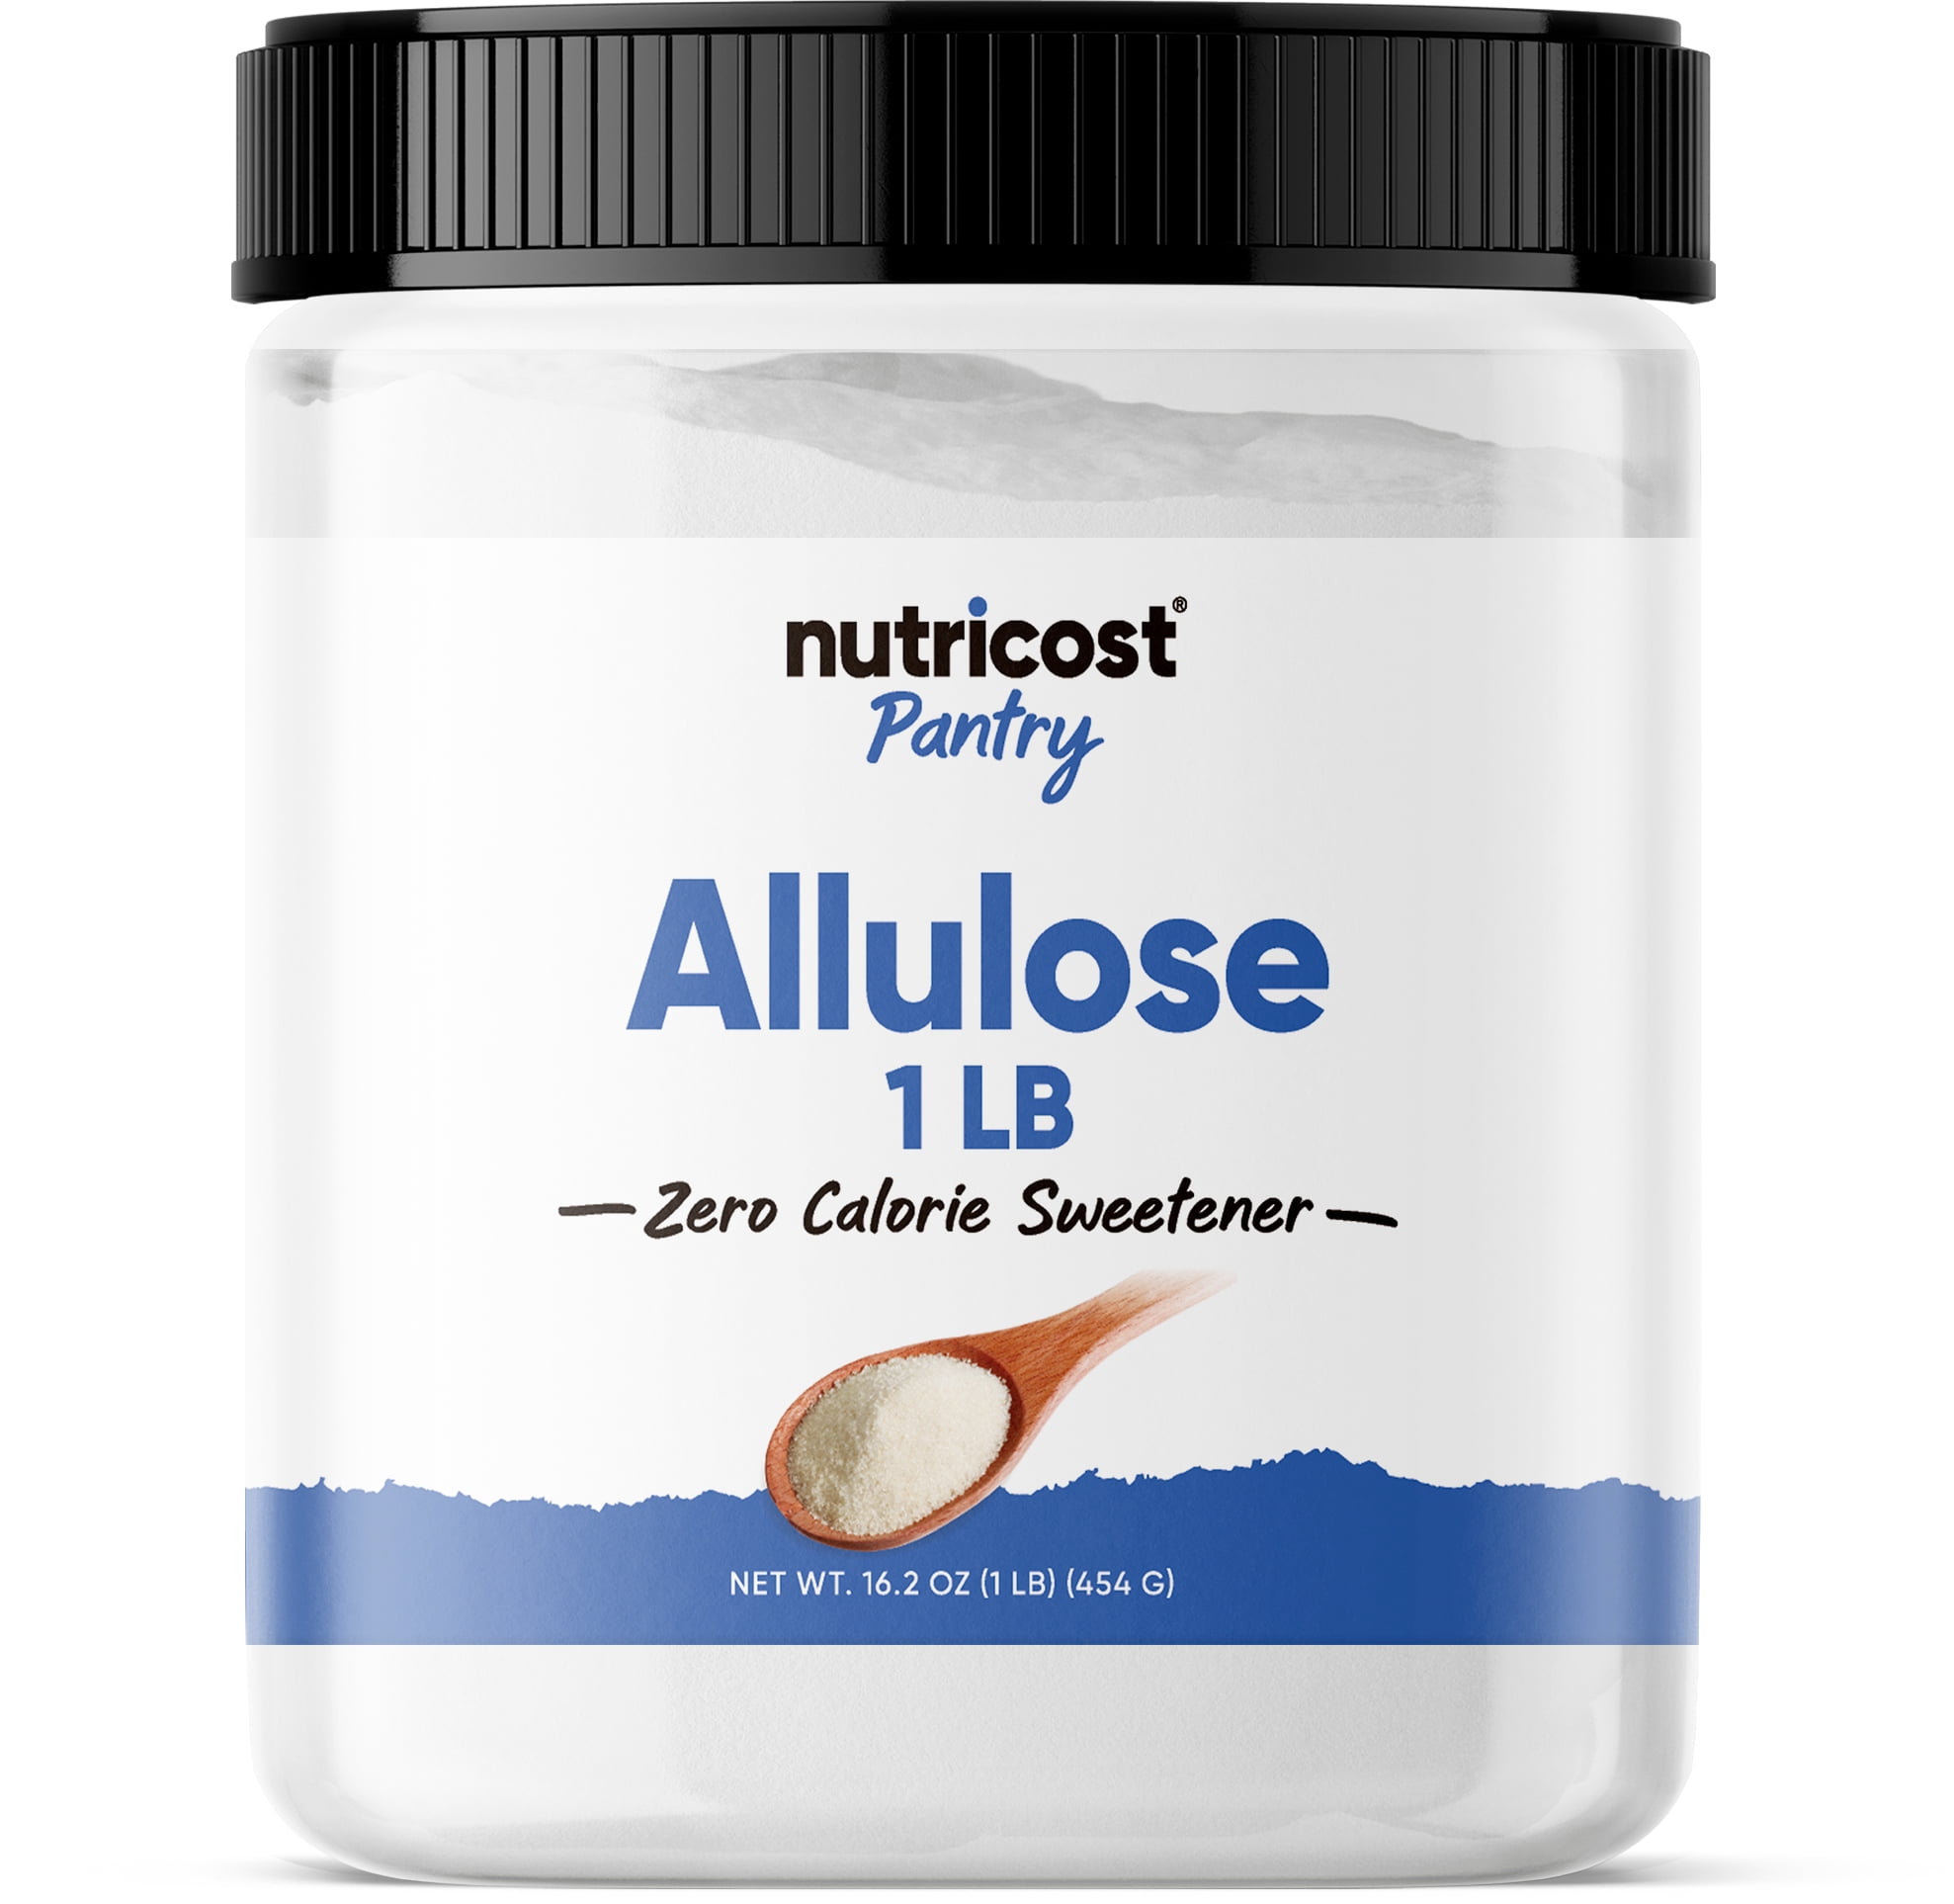 All About Allulose Sweetener – Lakanto